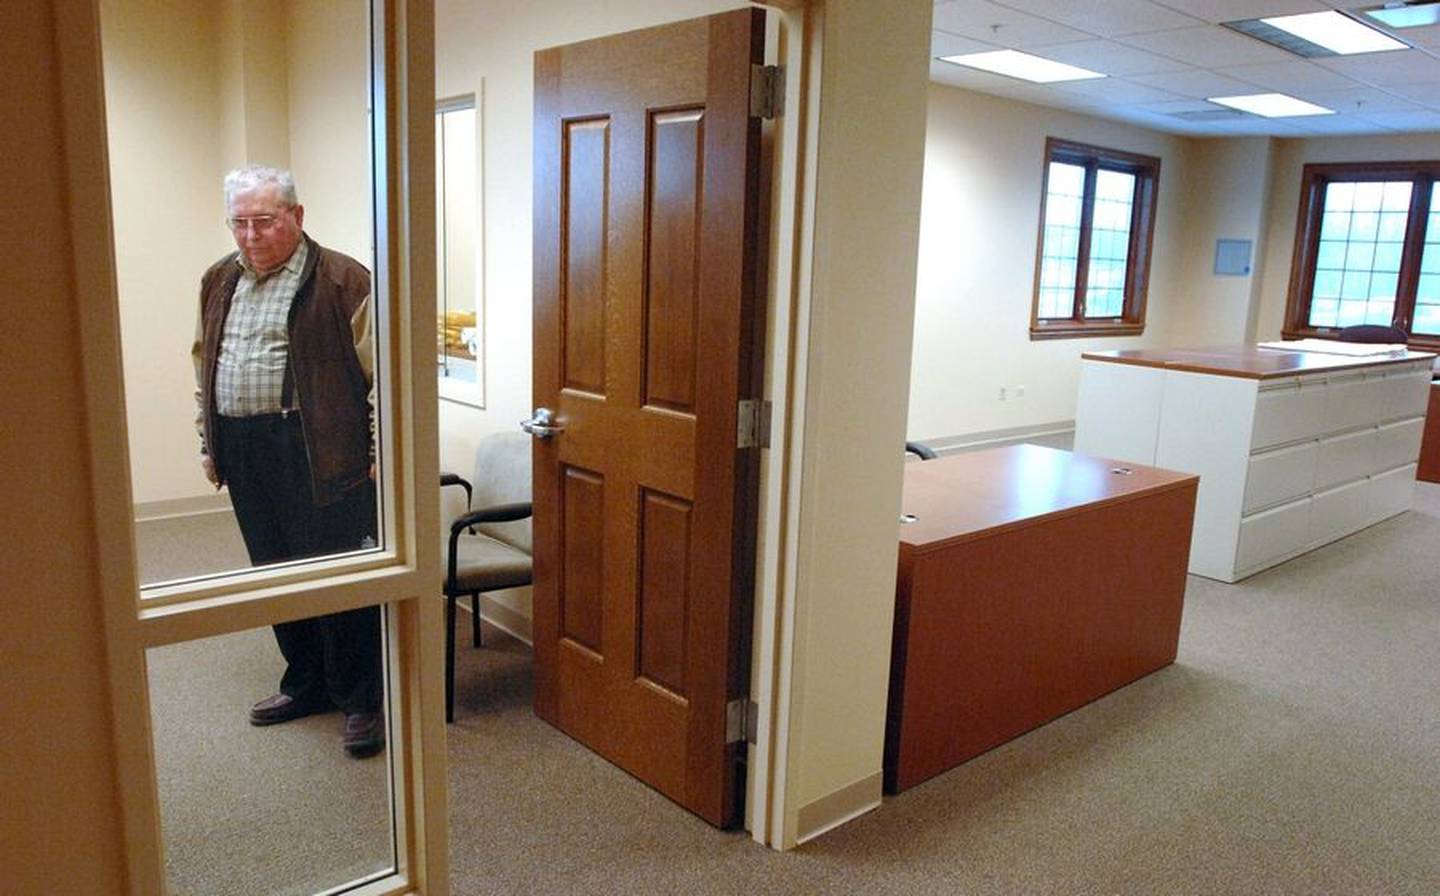 Then-Mayor Burnell Russell stands inside the clerk's office near the main reception area of the new Volo village hall at Route 60 and Fish Lake Road in 2008. Daily Herald file photo from 2008.